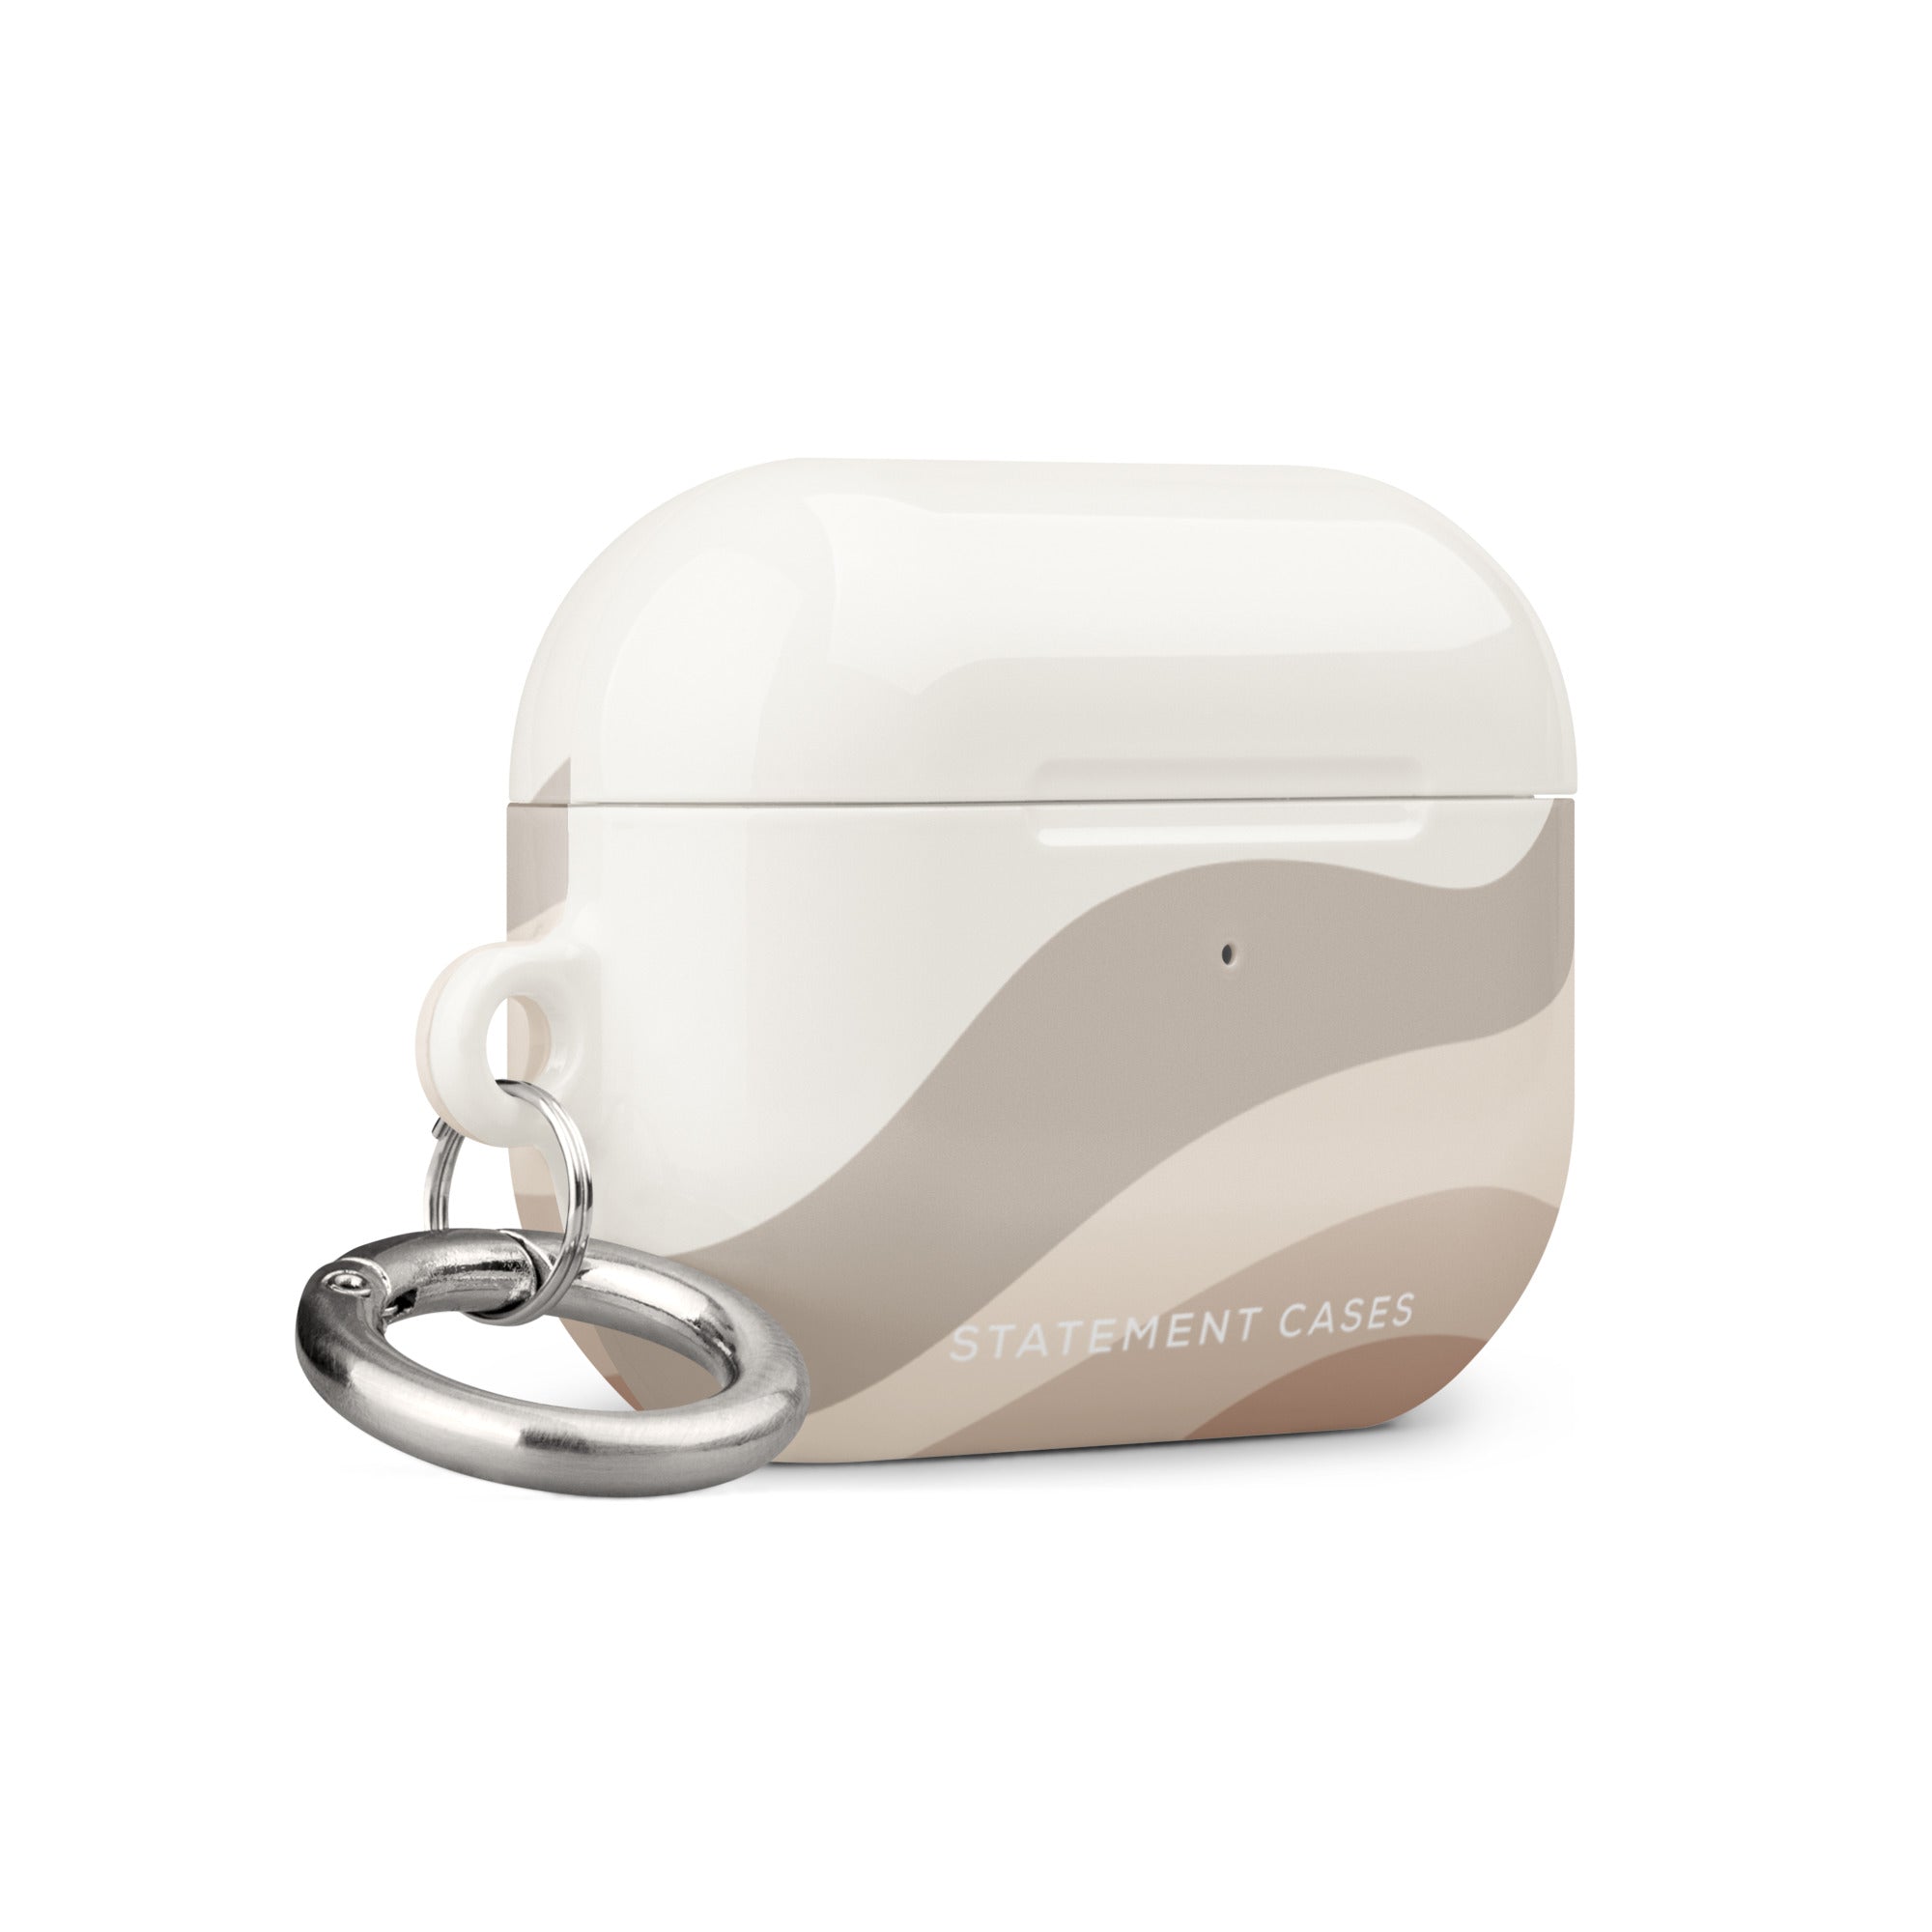 A white Serene Sands for AirPods Pro Gen 2 case with a beige, wavy pattern on the front. The case, made from premium impact-absorbing material, has a silver keyring attached to the side. The text "Statement Cases" is printed at the bottom front of the case.